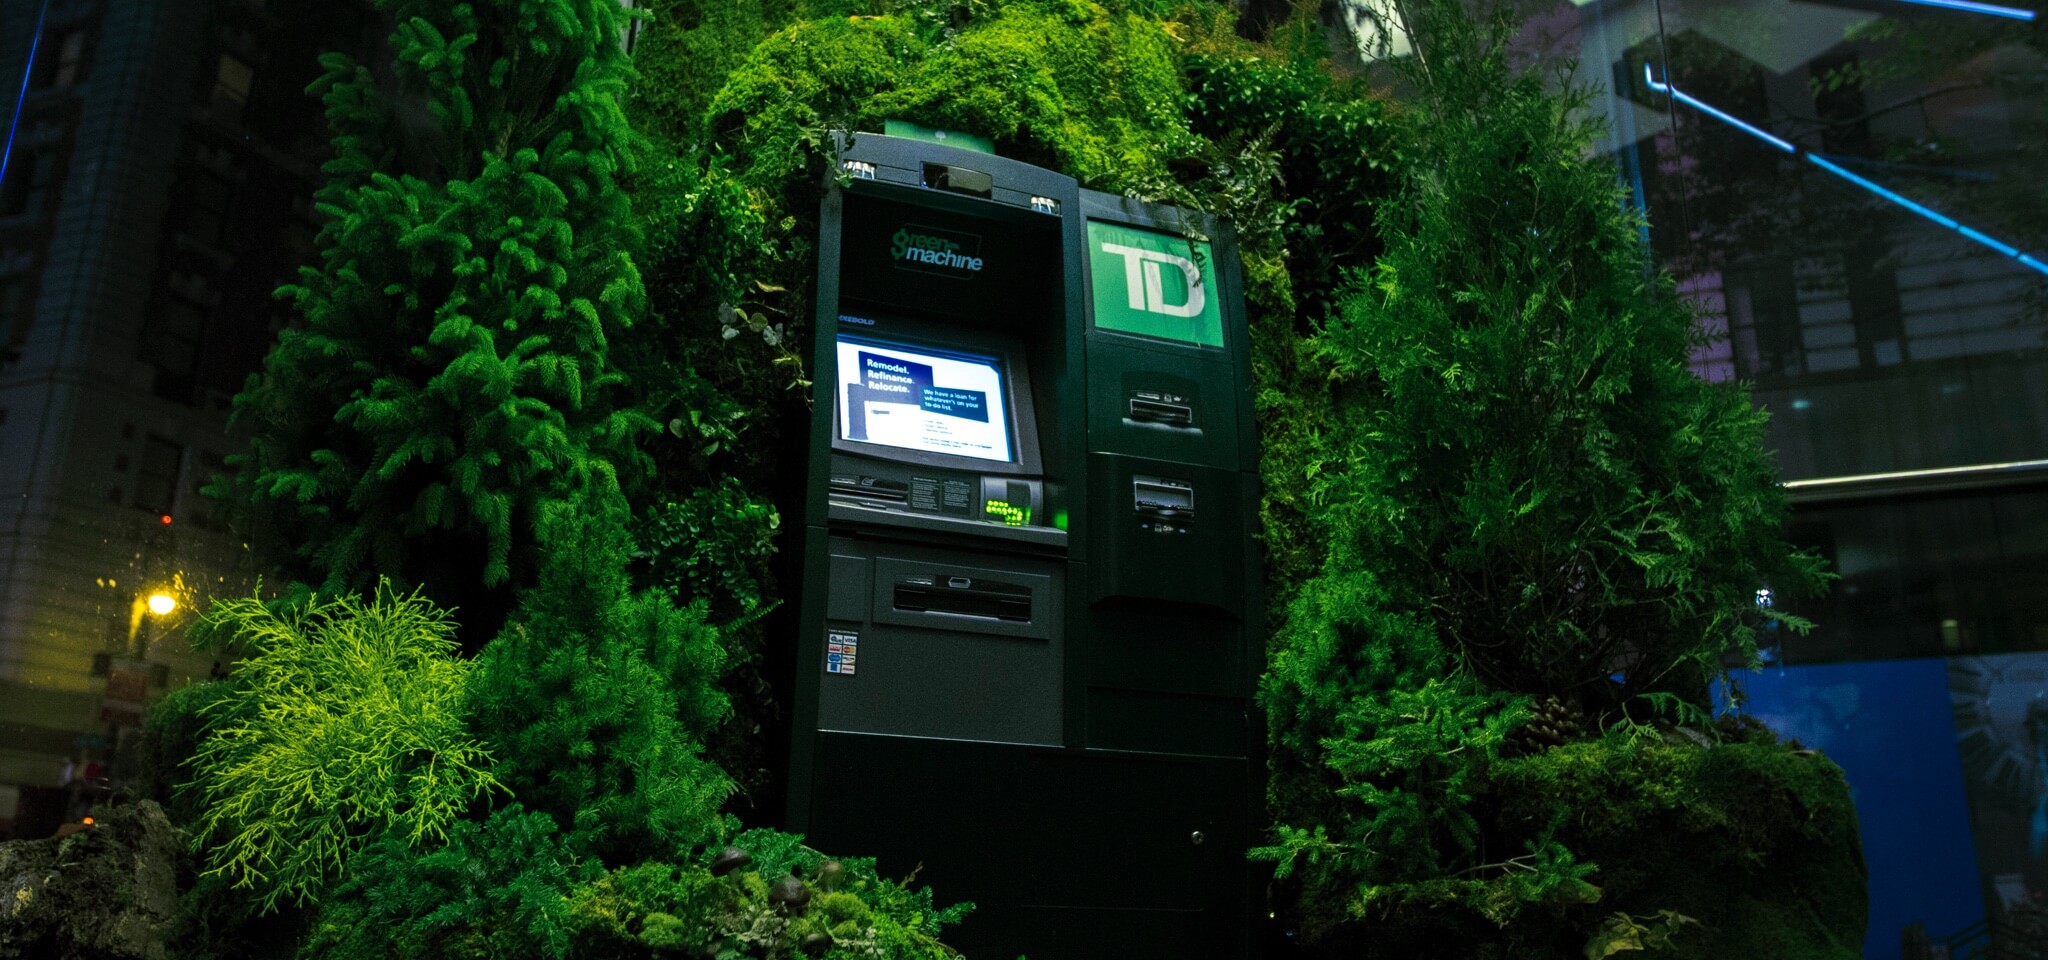 A TD Bank ATM machine is surrounded by lush green plants